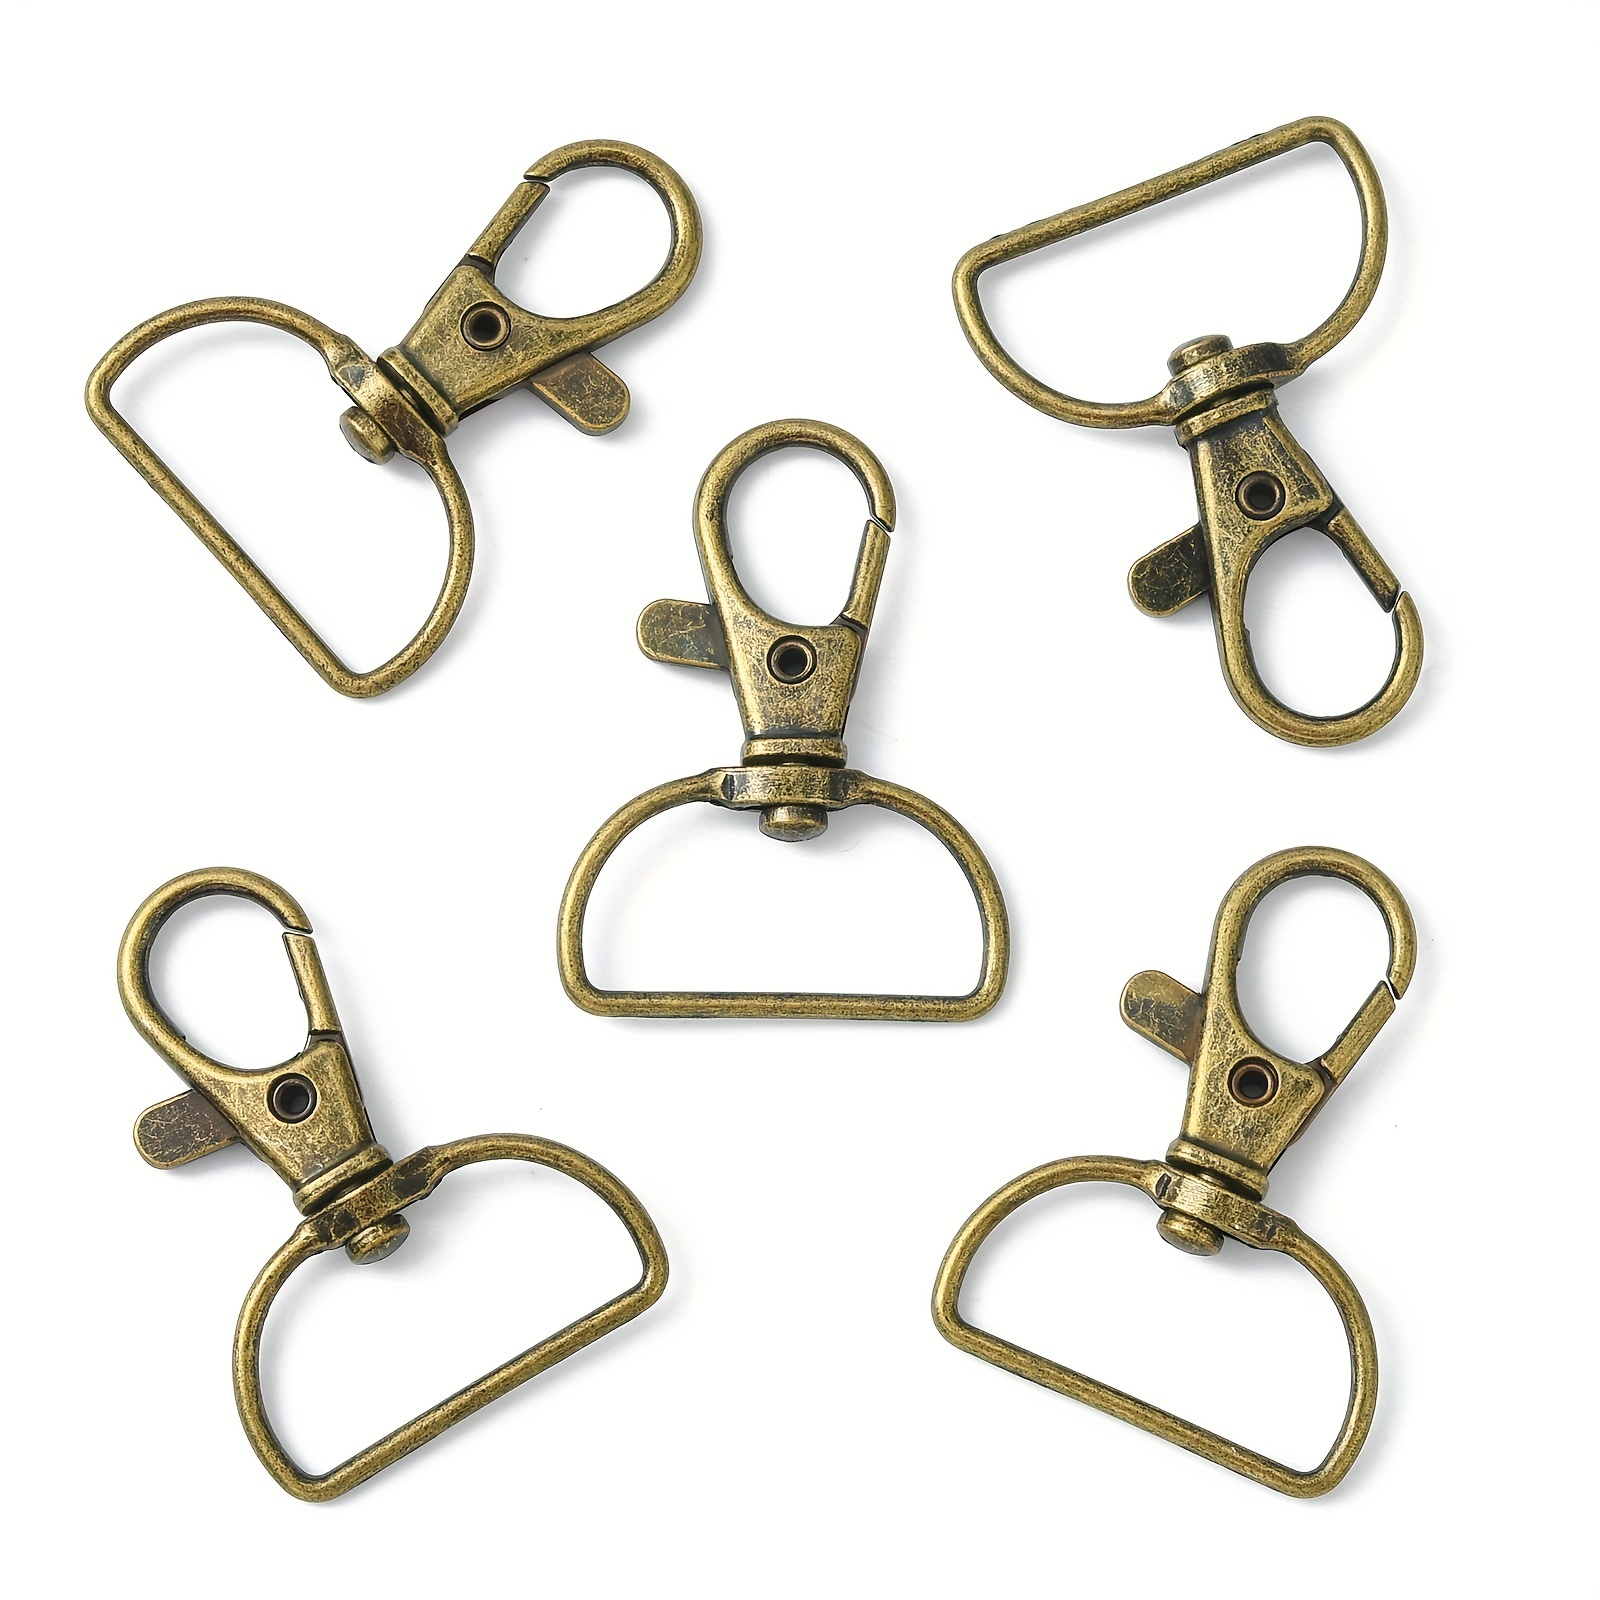 10pcs Swivel Clasps Lobster Clasp D Ring Key Chain Key Ring for